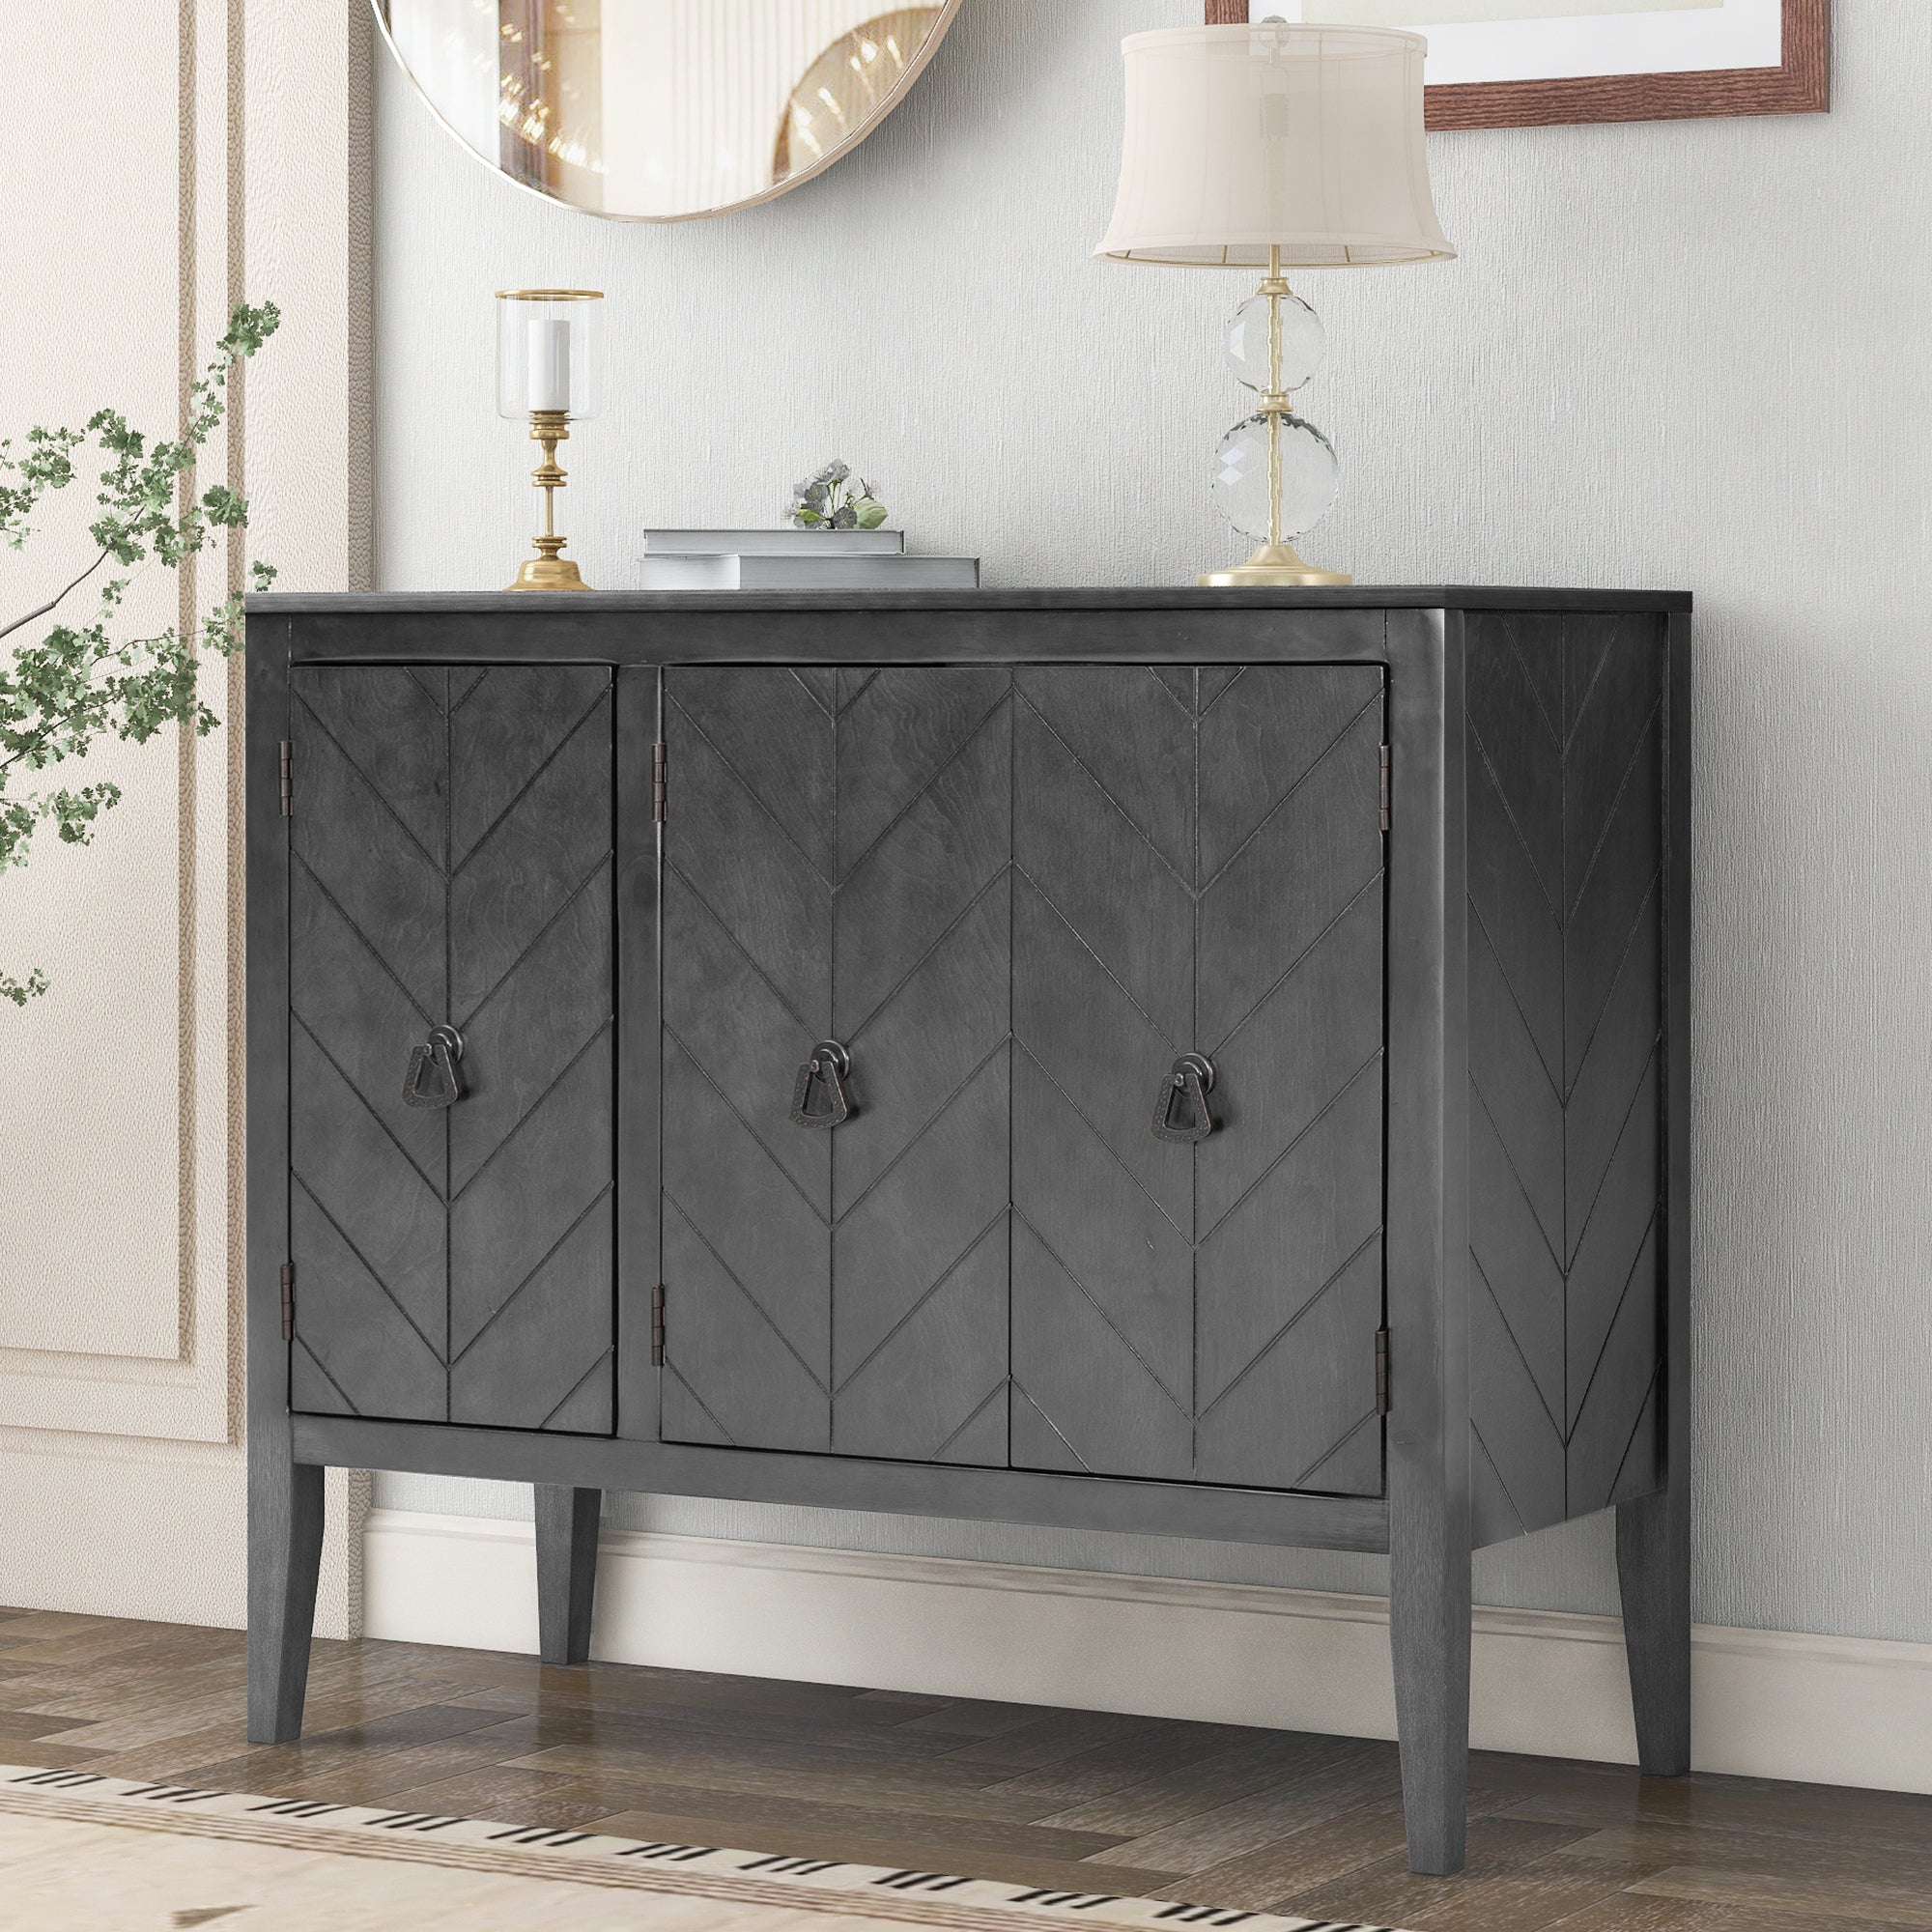 Accent Storage Cabinet Wooden Cabinet with Adjustable Shelf (Gray)